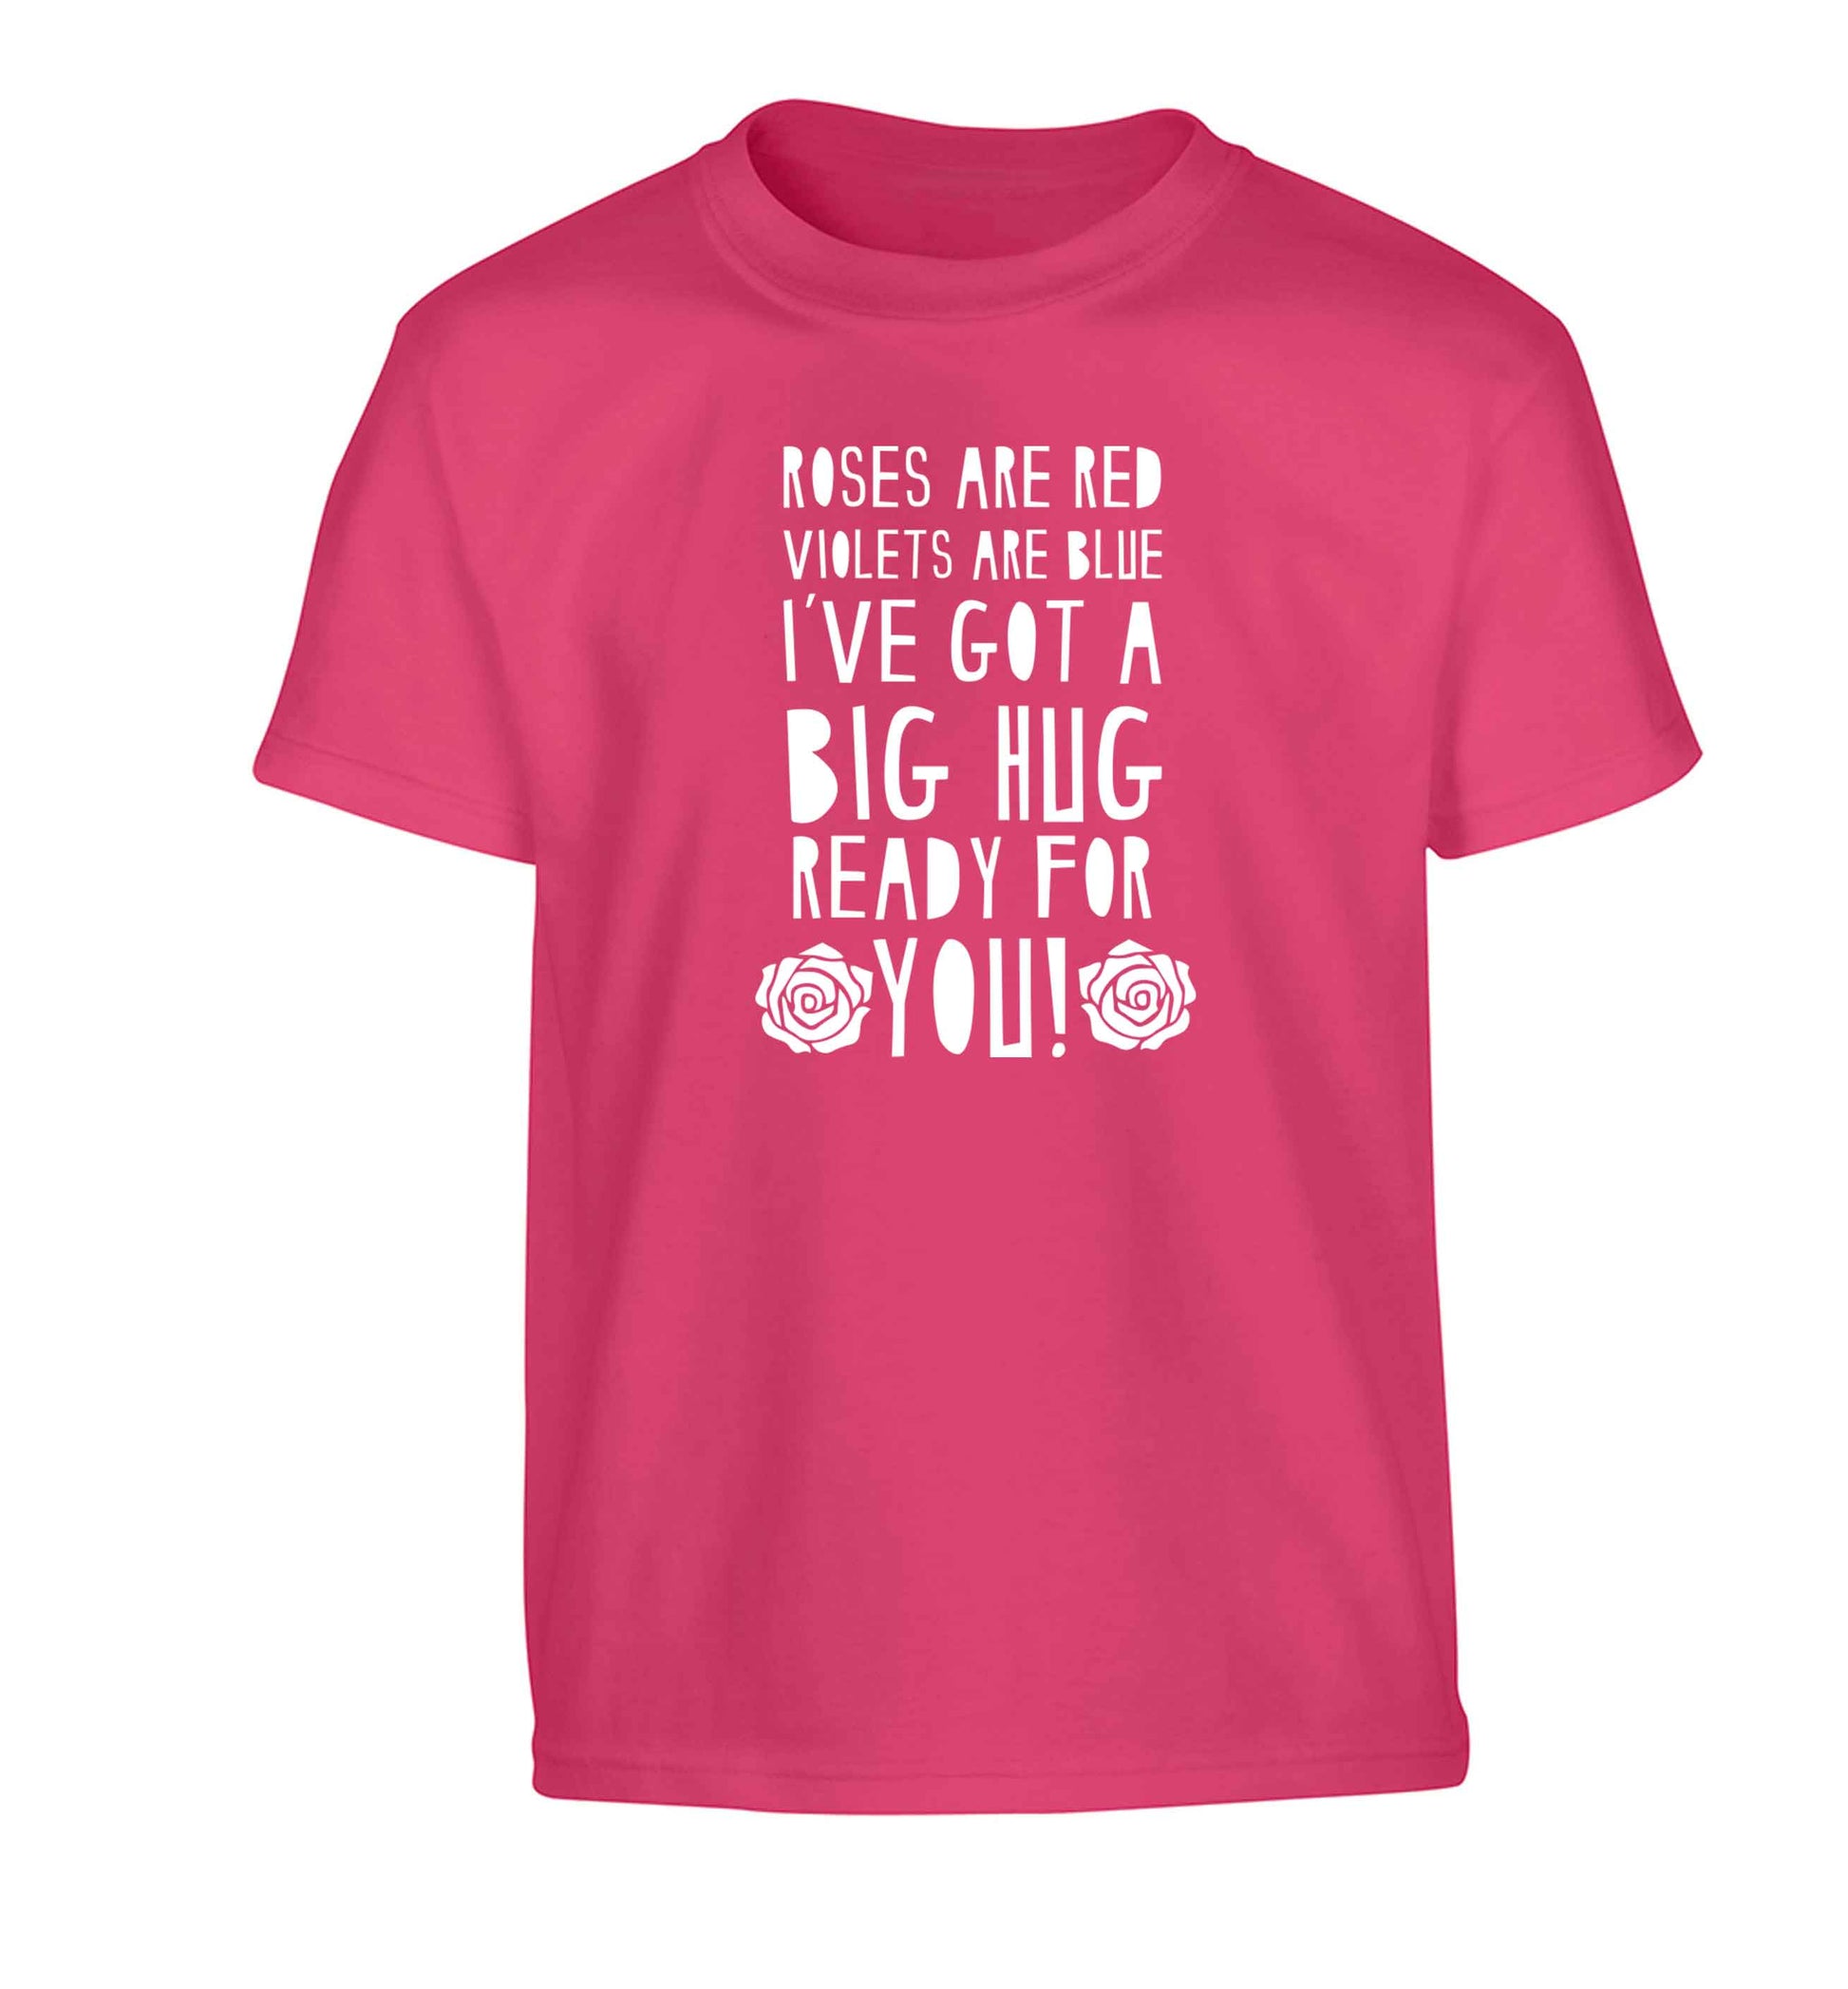 Roses are red violets are blue I've got a big hug coming for you Children's pink Tshirt 12-13 Years